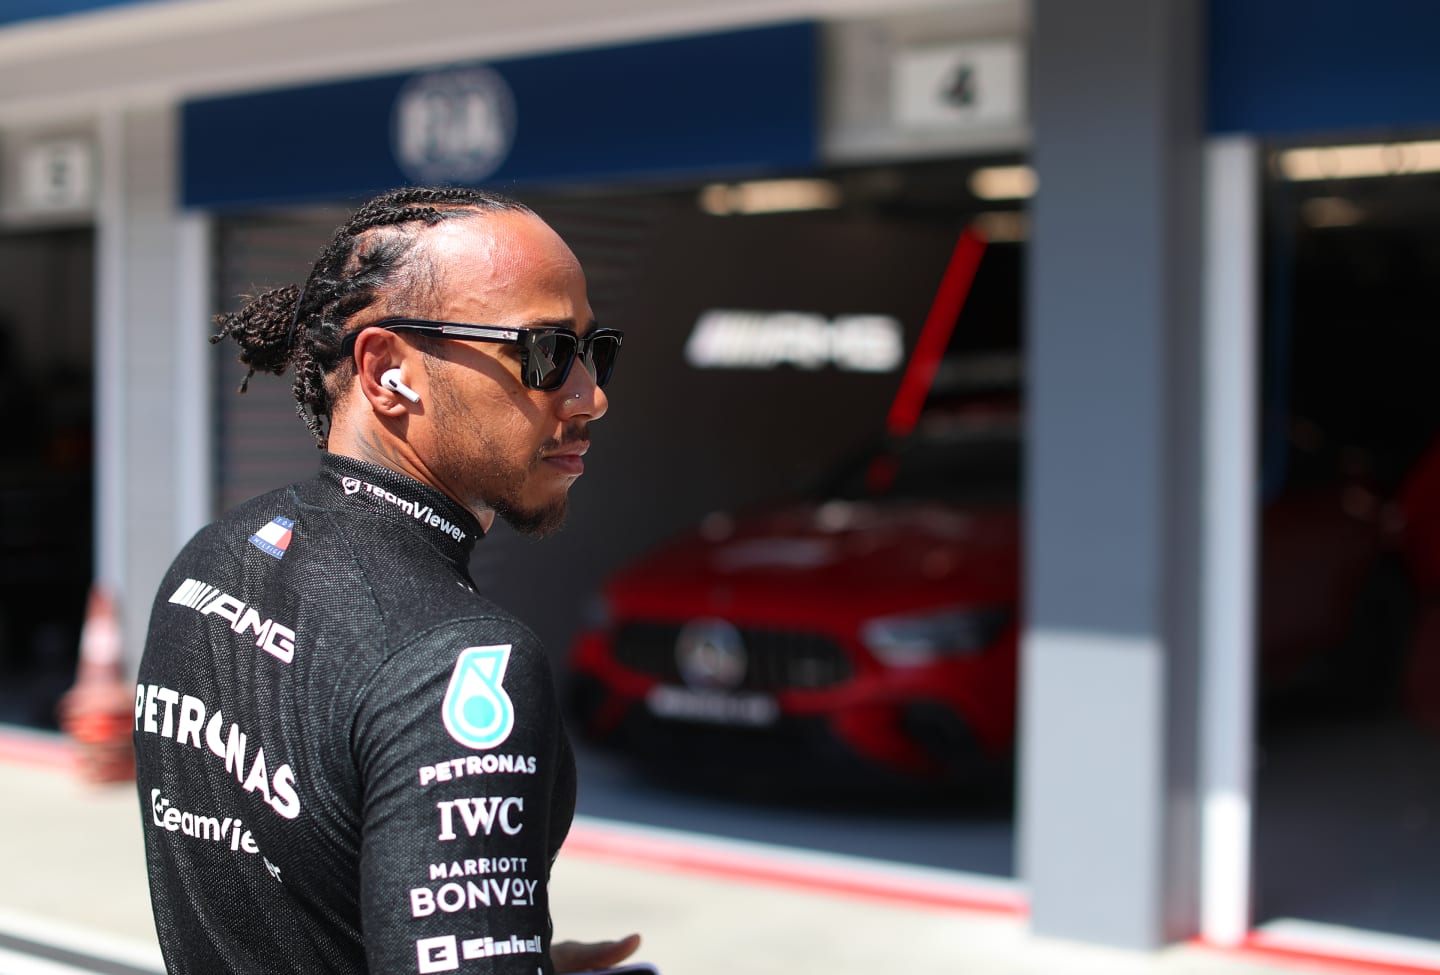 BUDAPEST, HUNGARY - JULY 23: Lewis Hamilton of Great Britain and Mercedes looks on prior to the F1